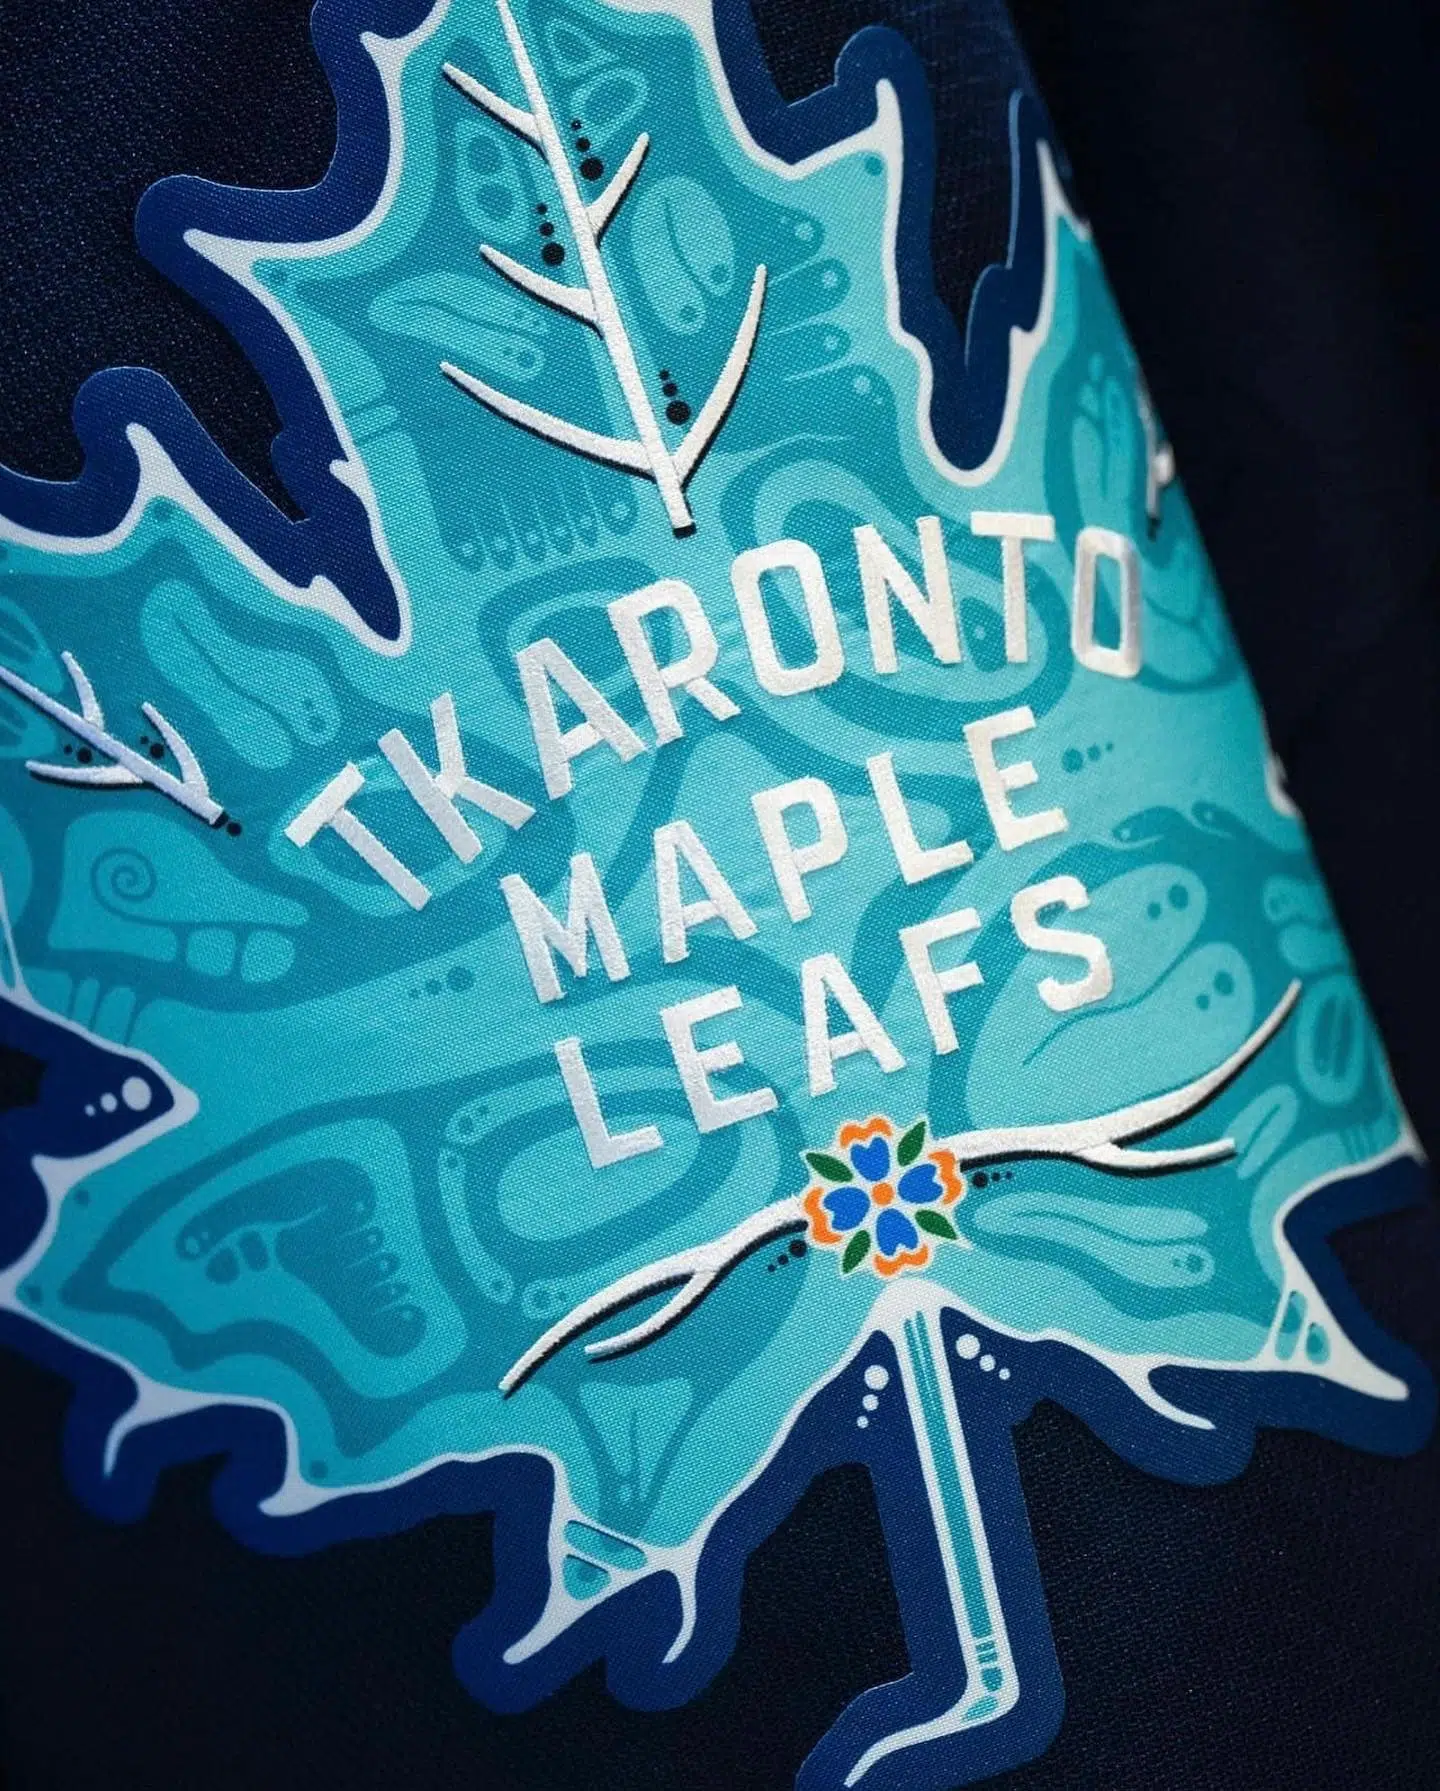 Toronto Maple Leafs sport work of local Indigenous artists